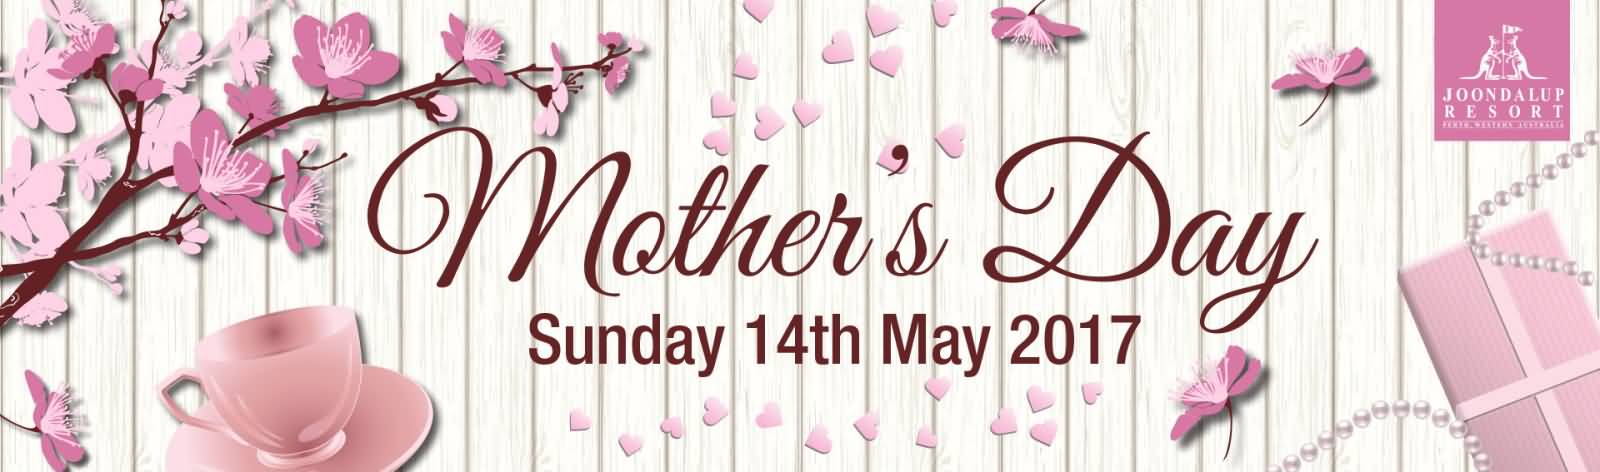 Mothers Day Sunday 14th May 2017 Facebook Cover Picture